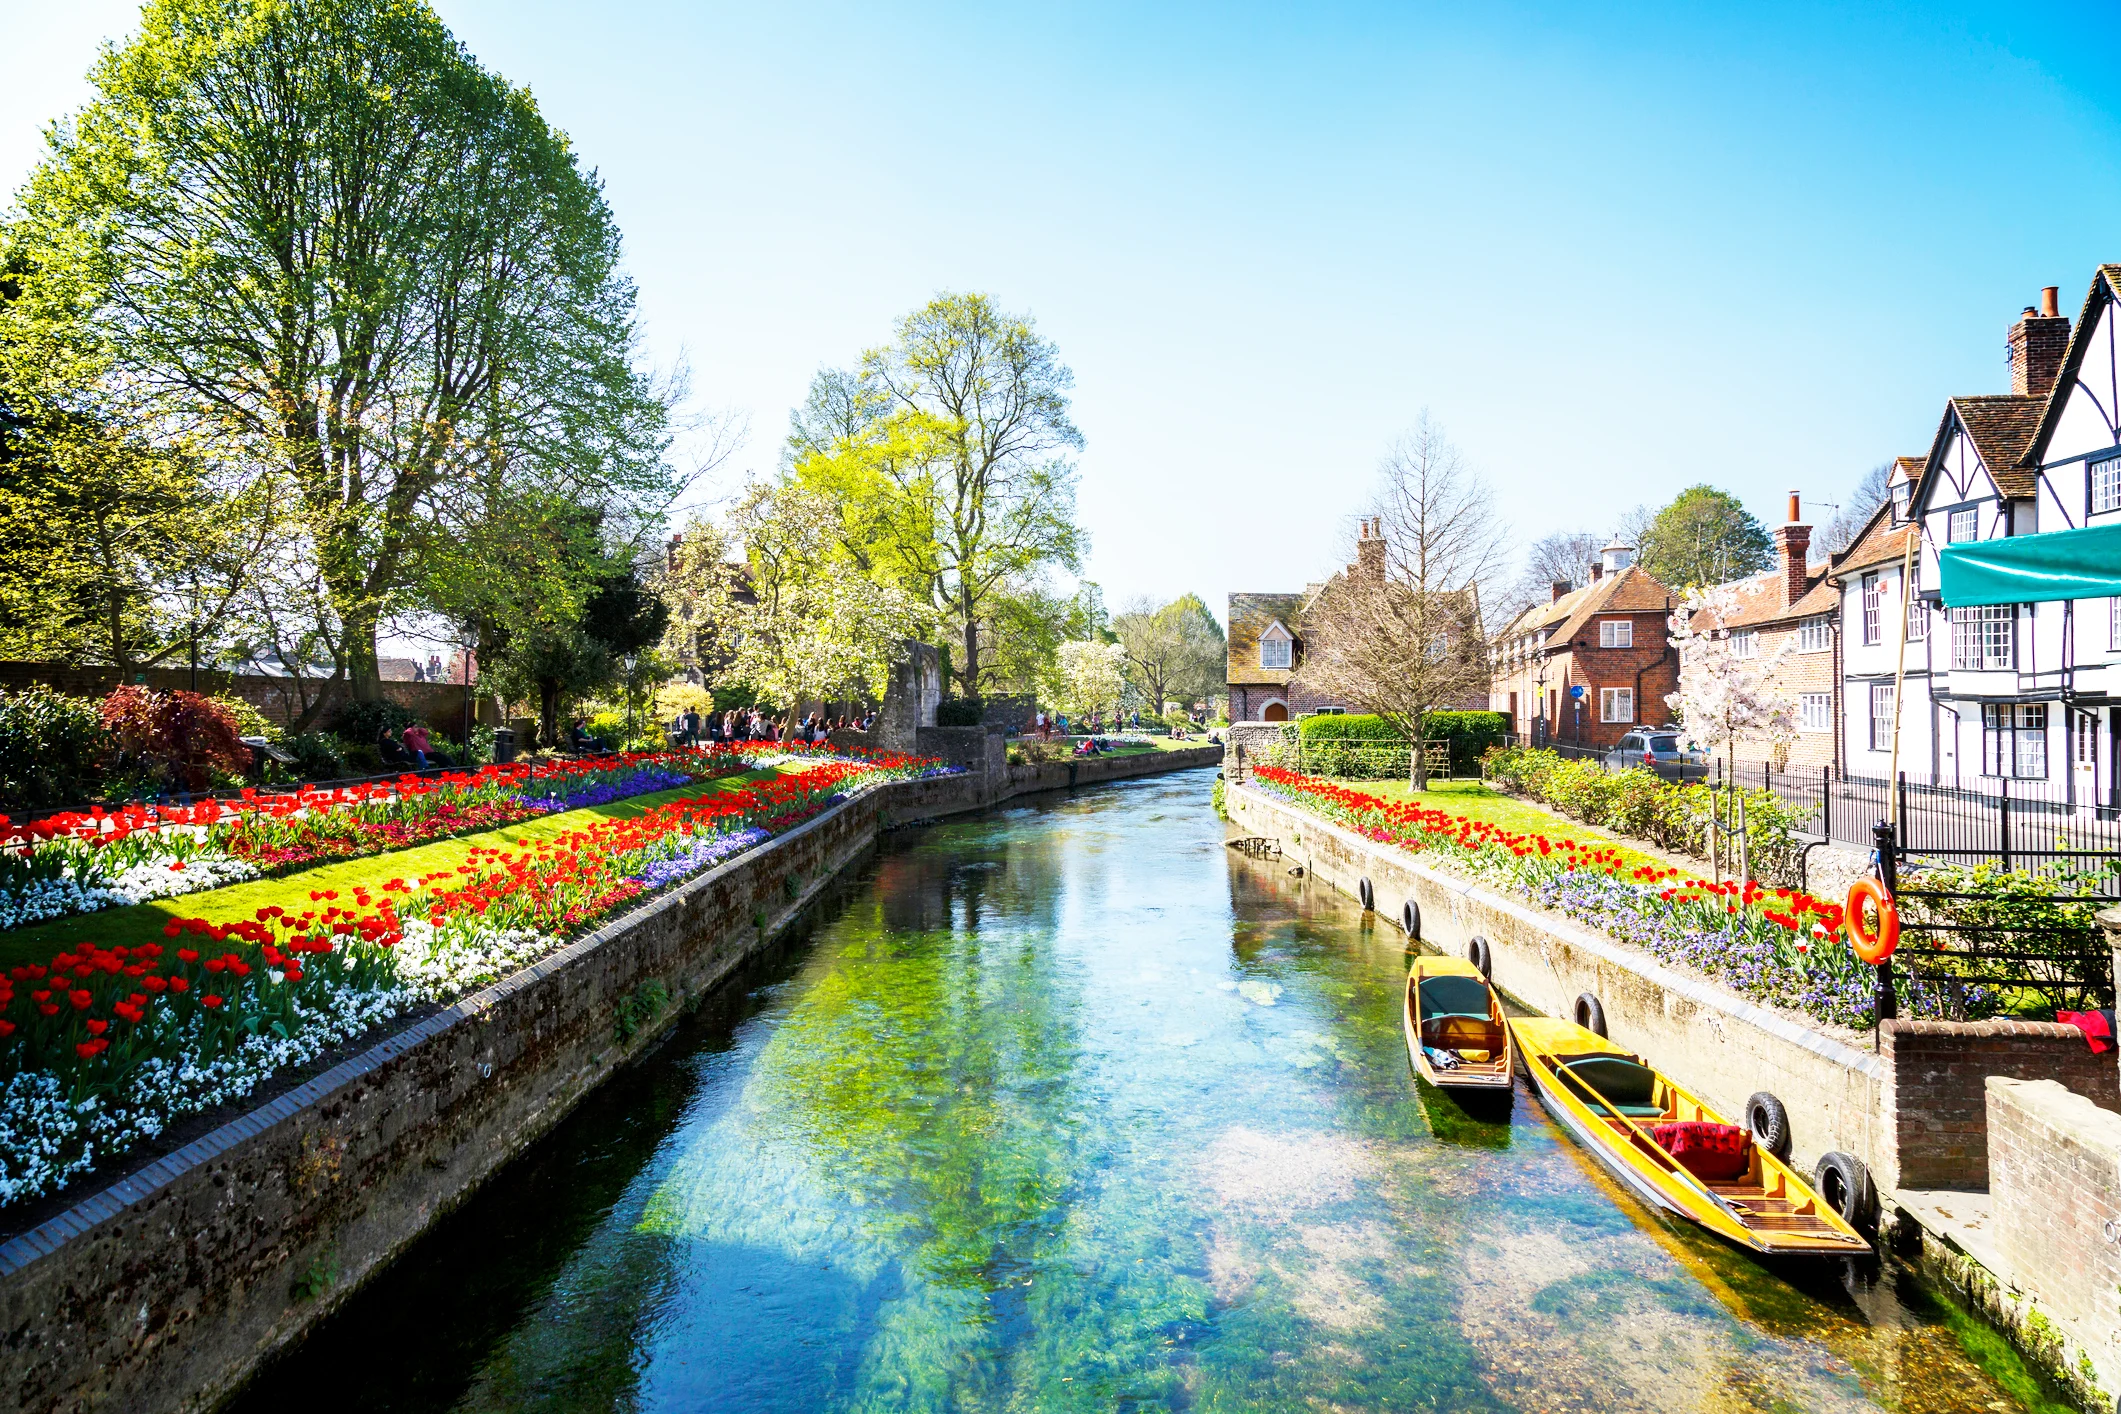 A river in an English village with colourful flowerbeds on each bank